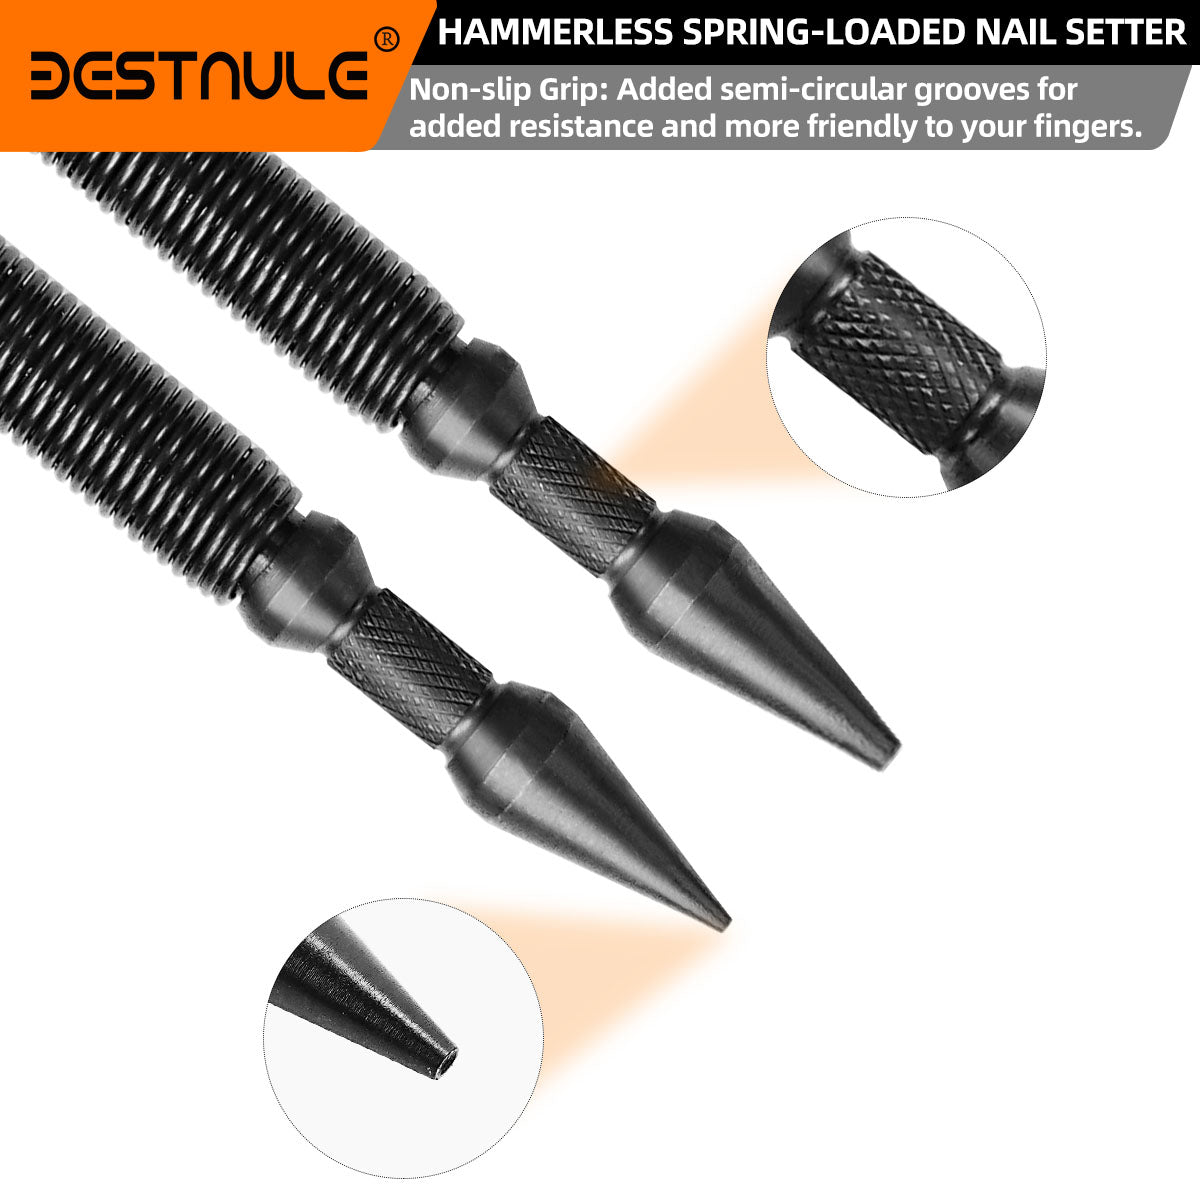 BESTNULE 2-Piece Nail Setter Dual Head Nail Set, Dual Head Nail Setter, Spring Loaded Center Hole Punch, Hand Tool for Metal or Wood, Nail Setter Features 1/16-in, 1/32-in, 1/8-in, 3/32-in